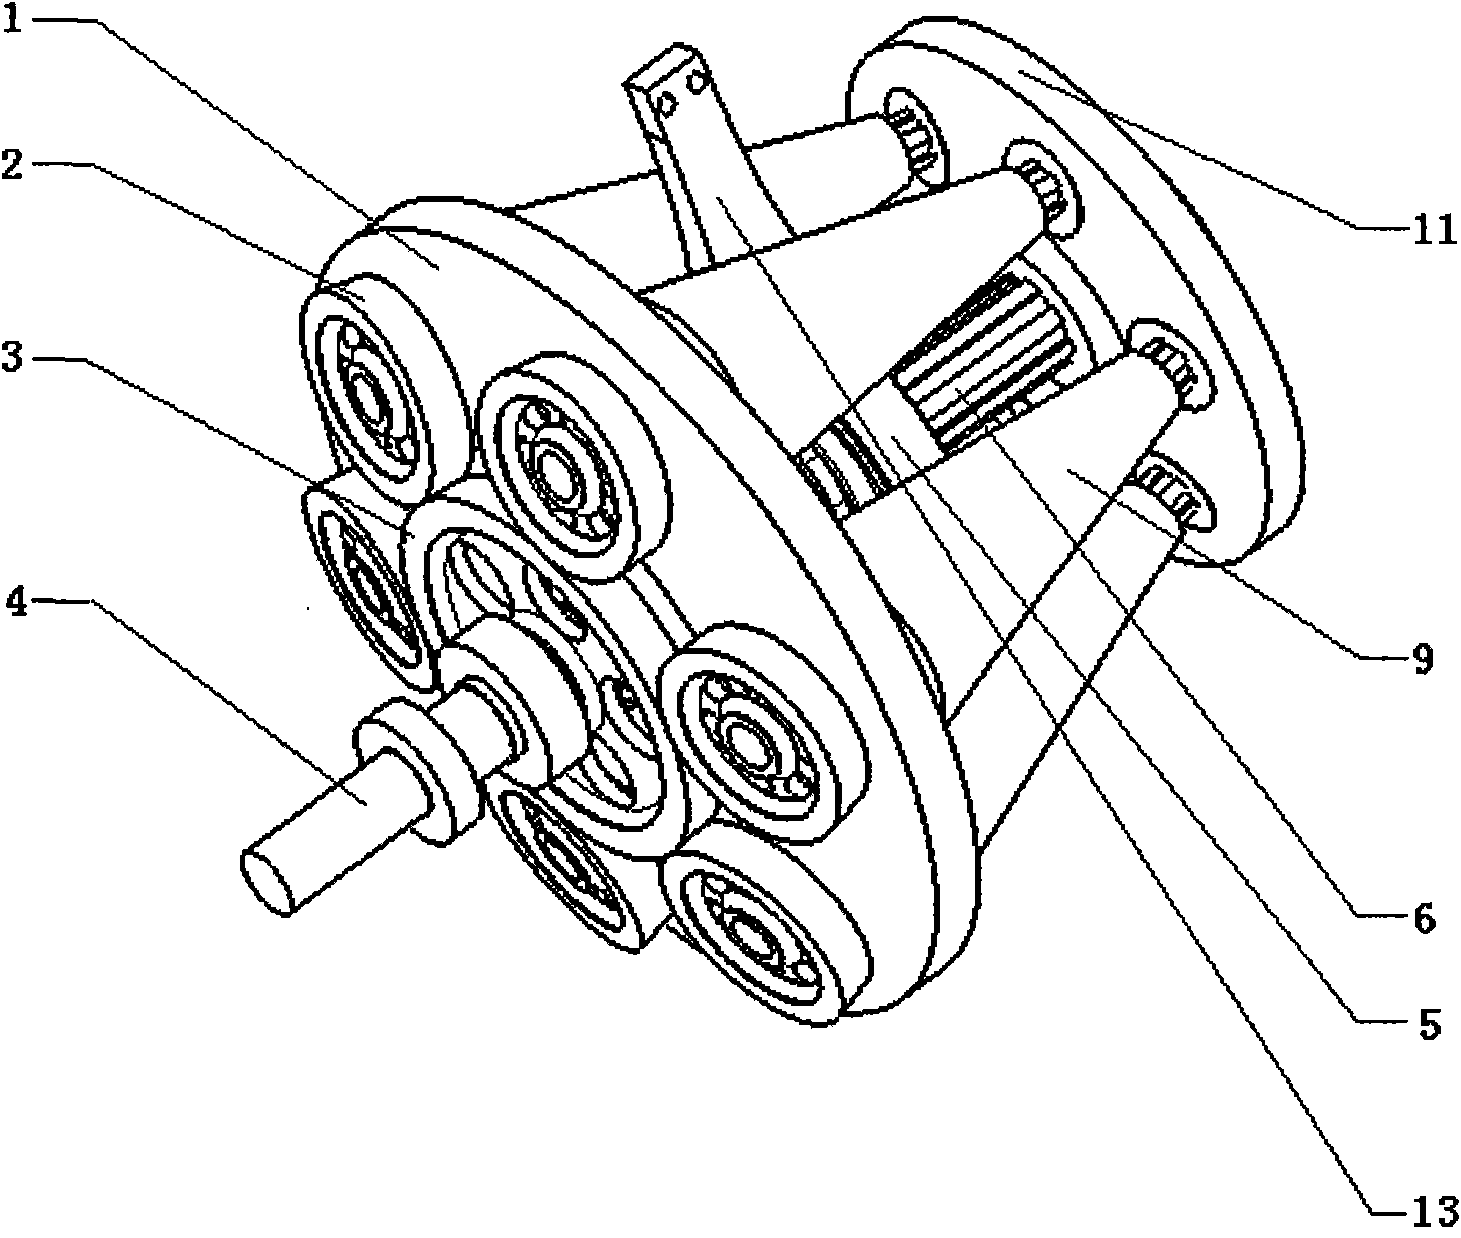 Stepless speed change device of circularly arranged cone pulleys